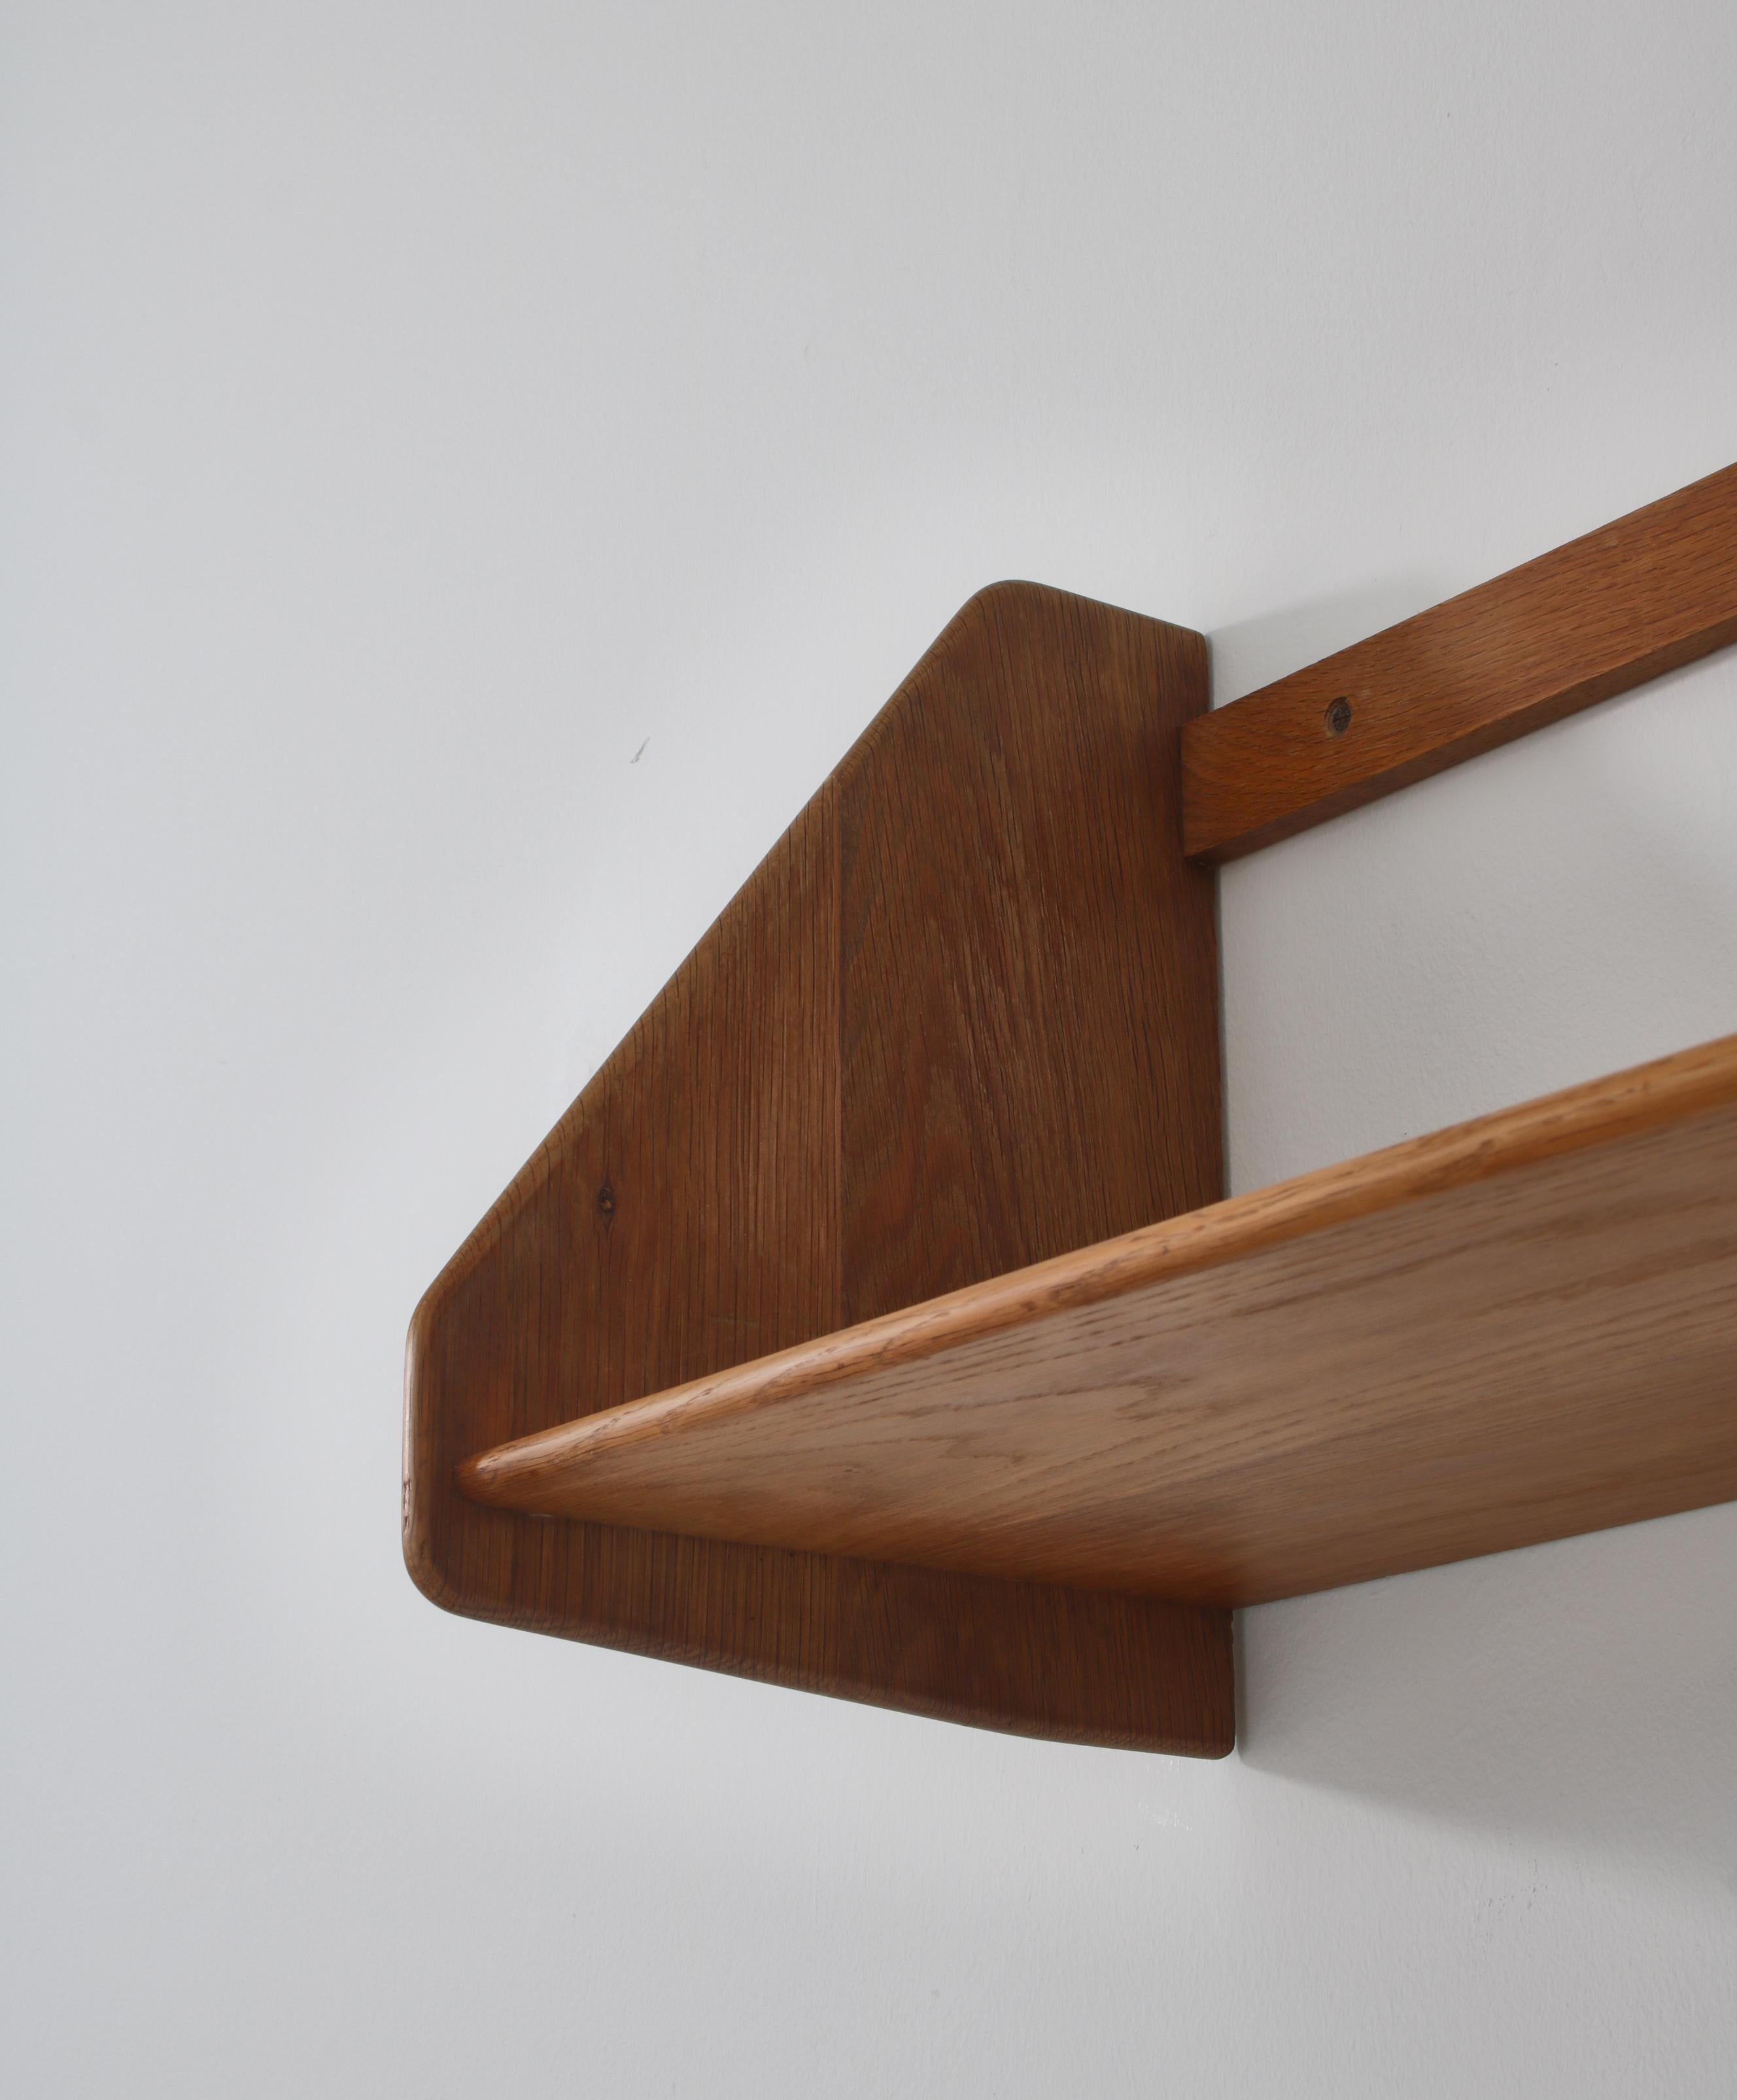 Mid-20th Century Hans J. Wegner Large Wall Shelf in Patinated Oak Made at Ry Mobler Denmark 1950s For Sale